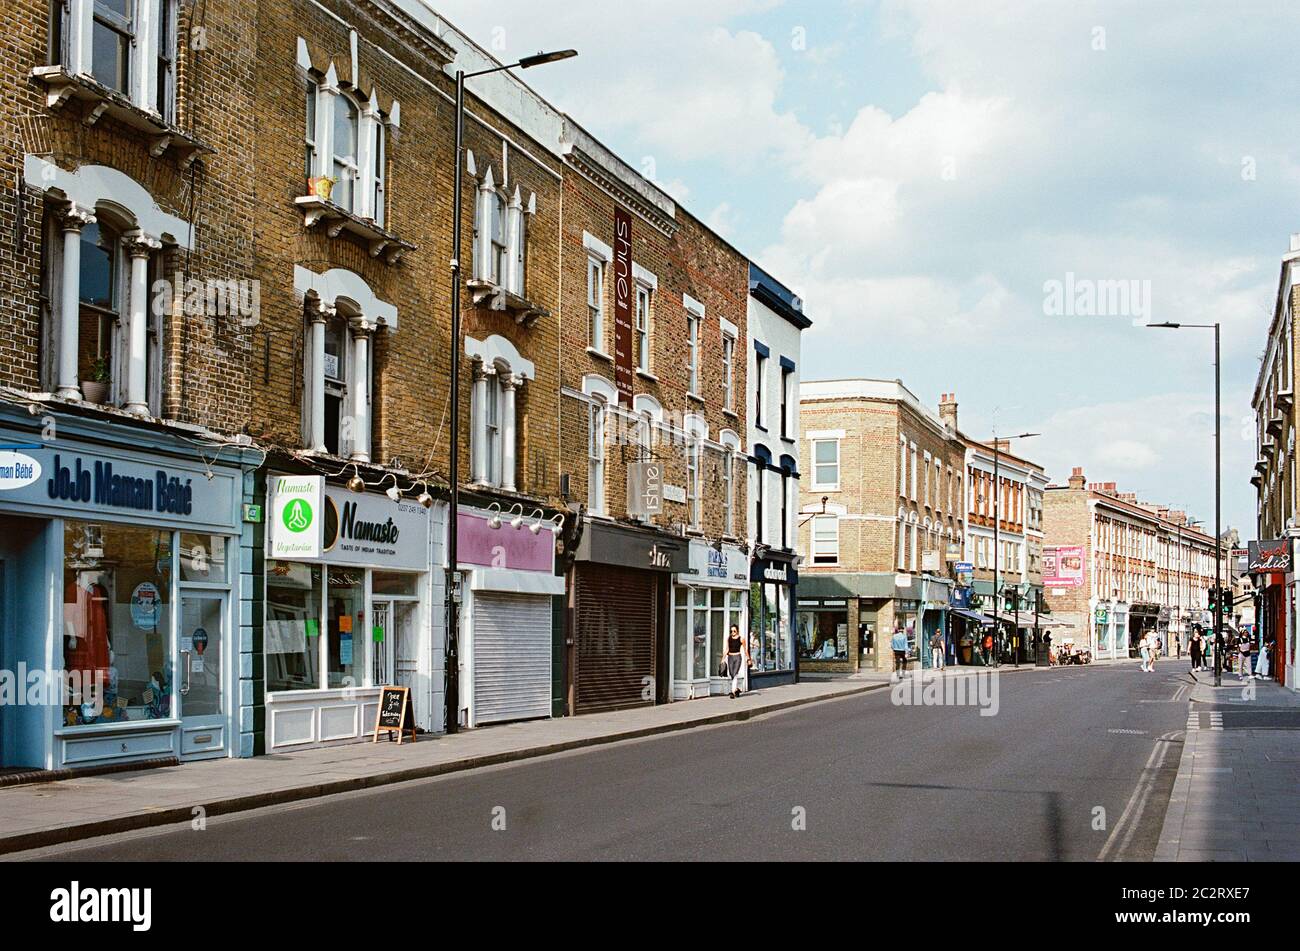 Church Street, Stoke Newington, North London UK, looking east, with shops and pedestrians Stock Photo